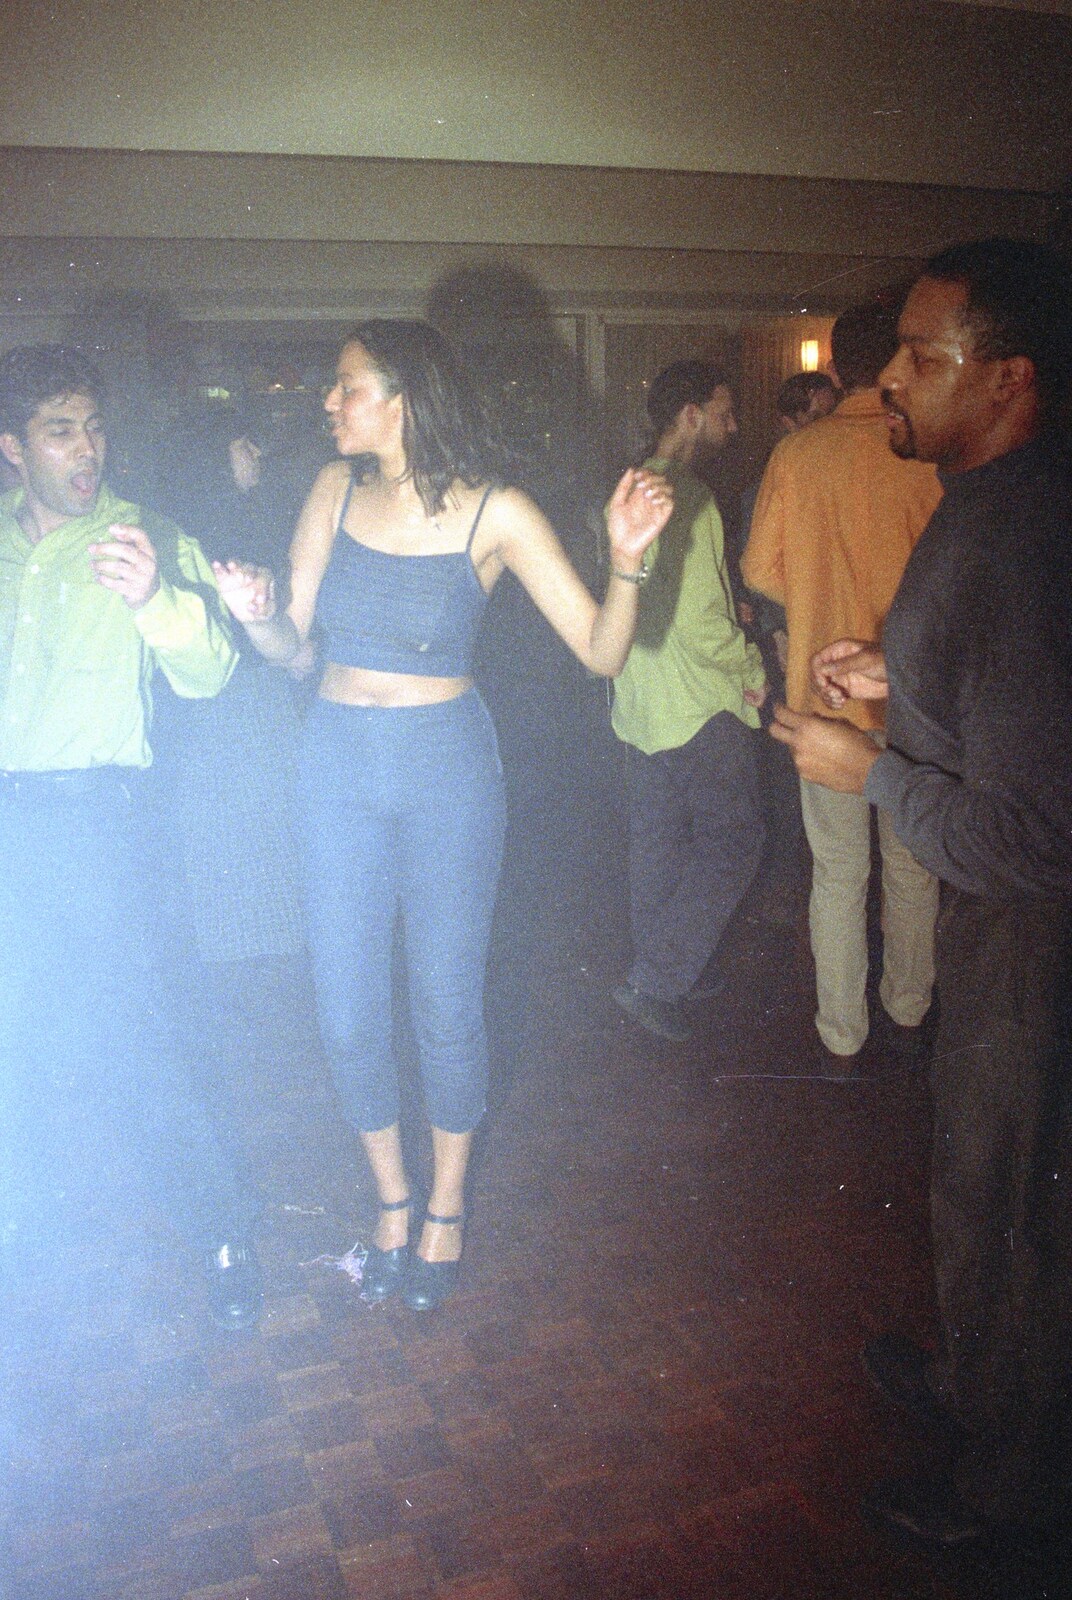 Natalie dances about from A CISU Thrash in the SCC Social Club, Rope Walk, Ipswich - 4th April 1998